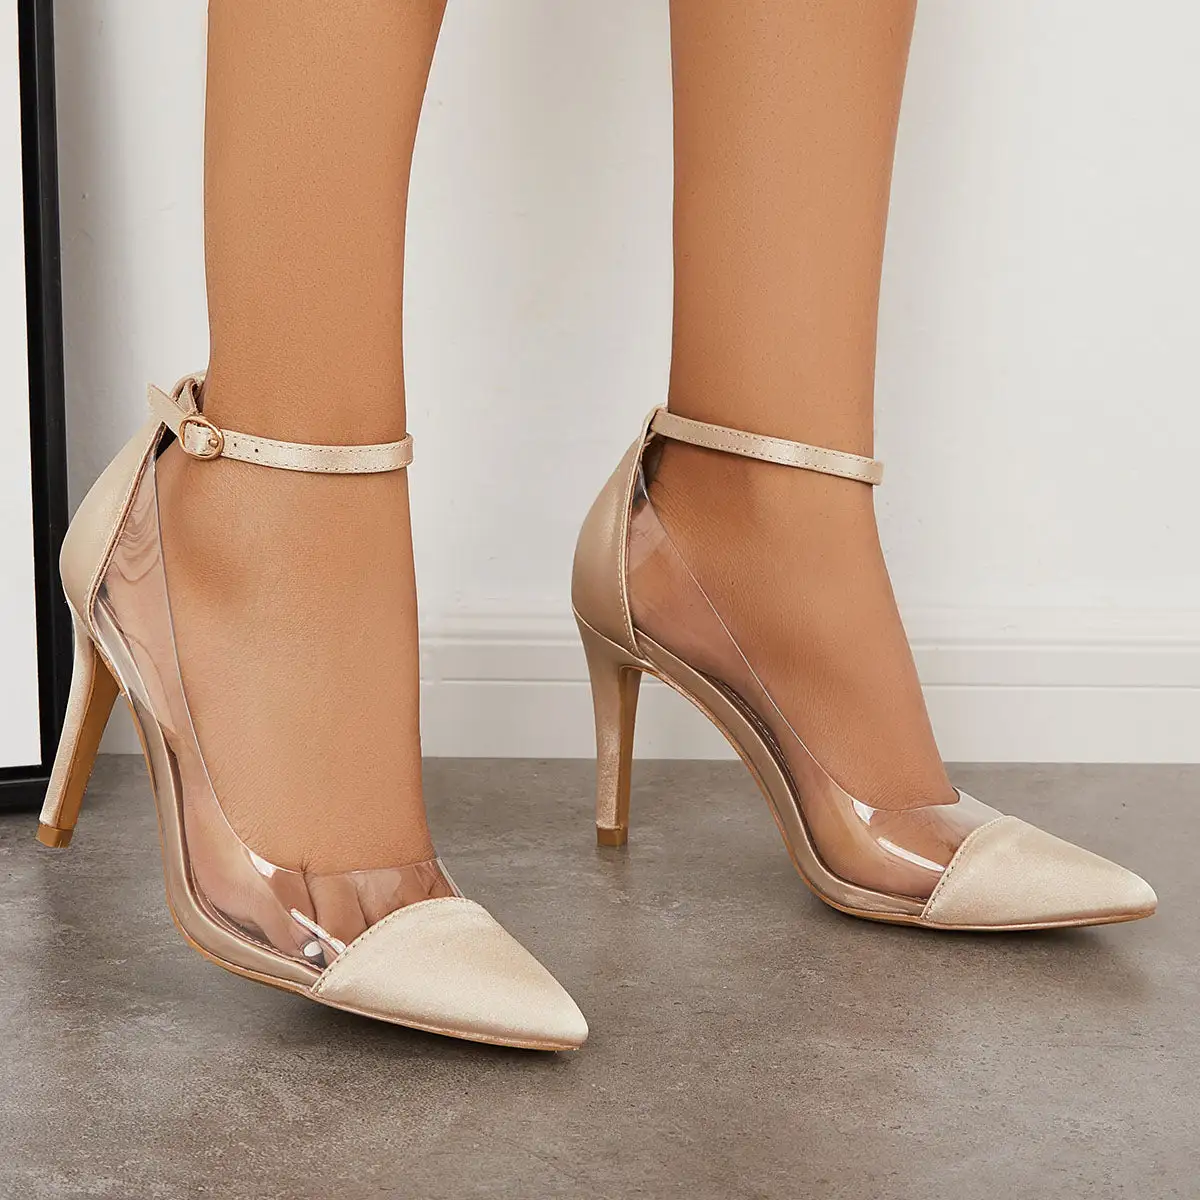 Clear High Heels Pointed Toe Stiletto Ankle Strap Dress Pumps